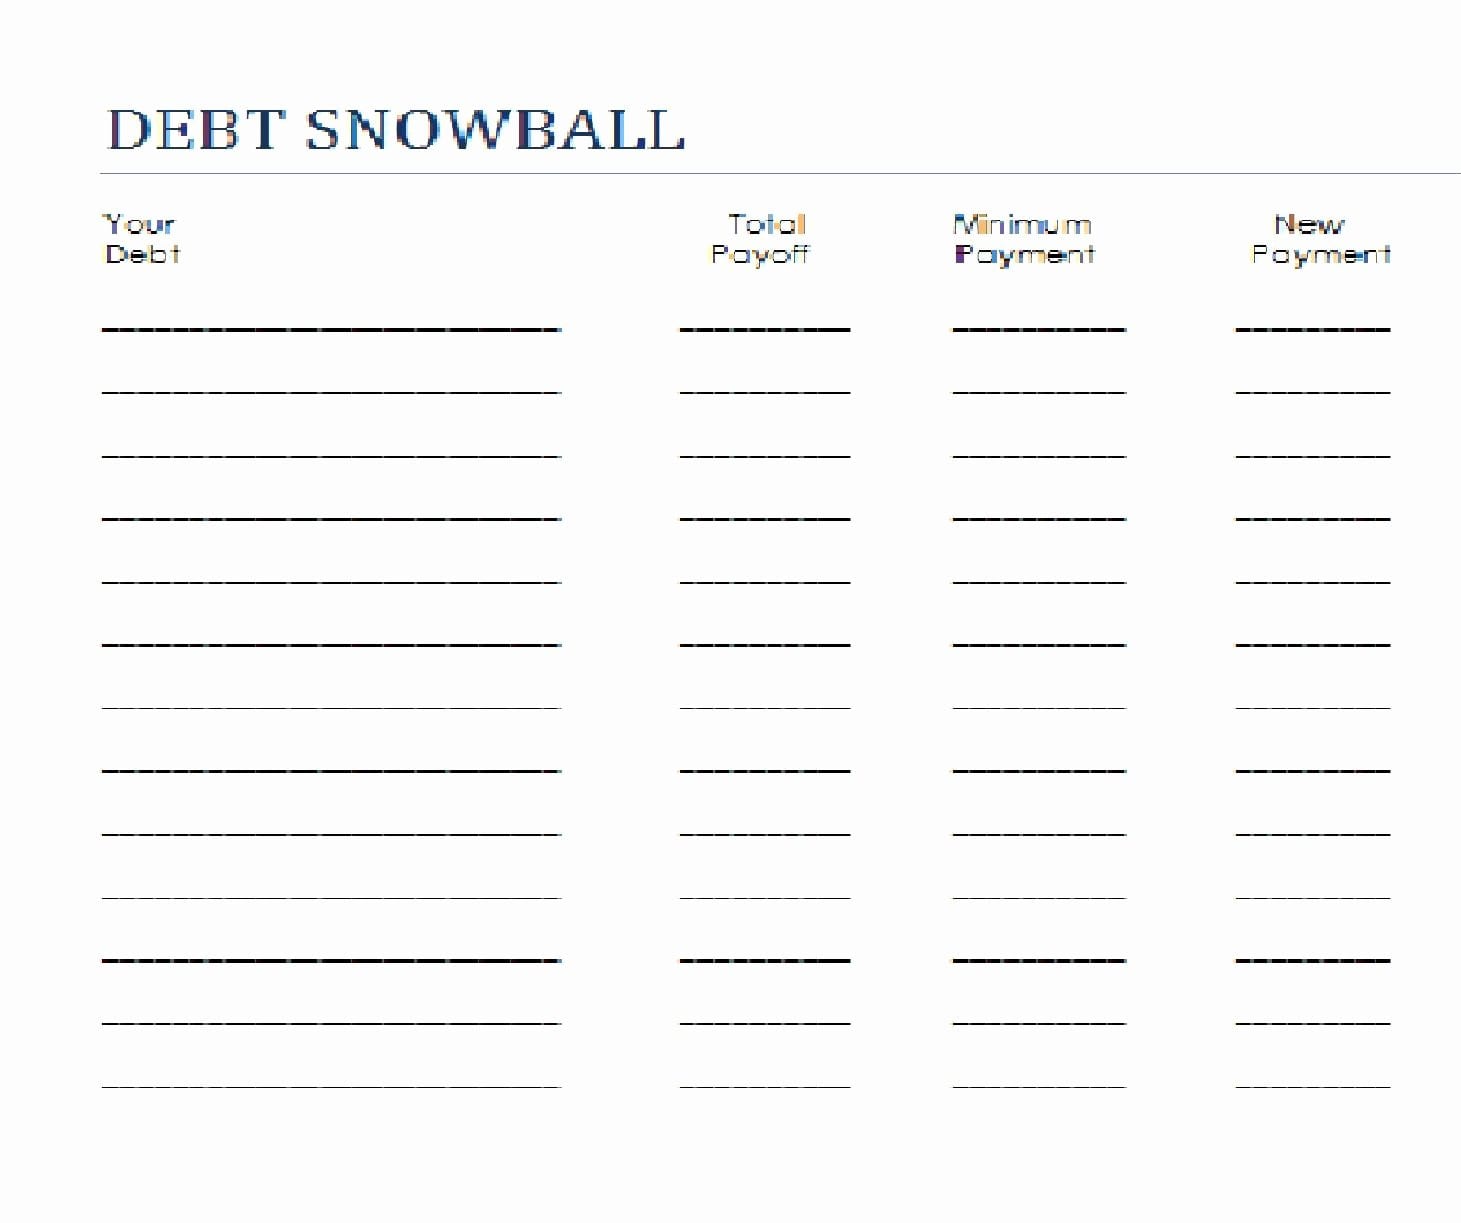 Dave Ramsey Spreadsheets Then Free Printable Debt Snowball For Dave Ramsey Debt Snowball Worksheets